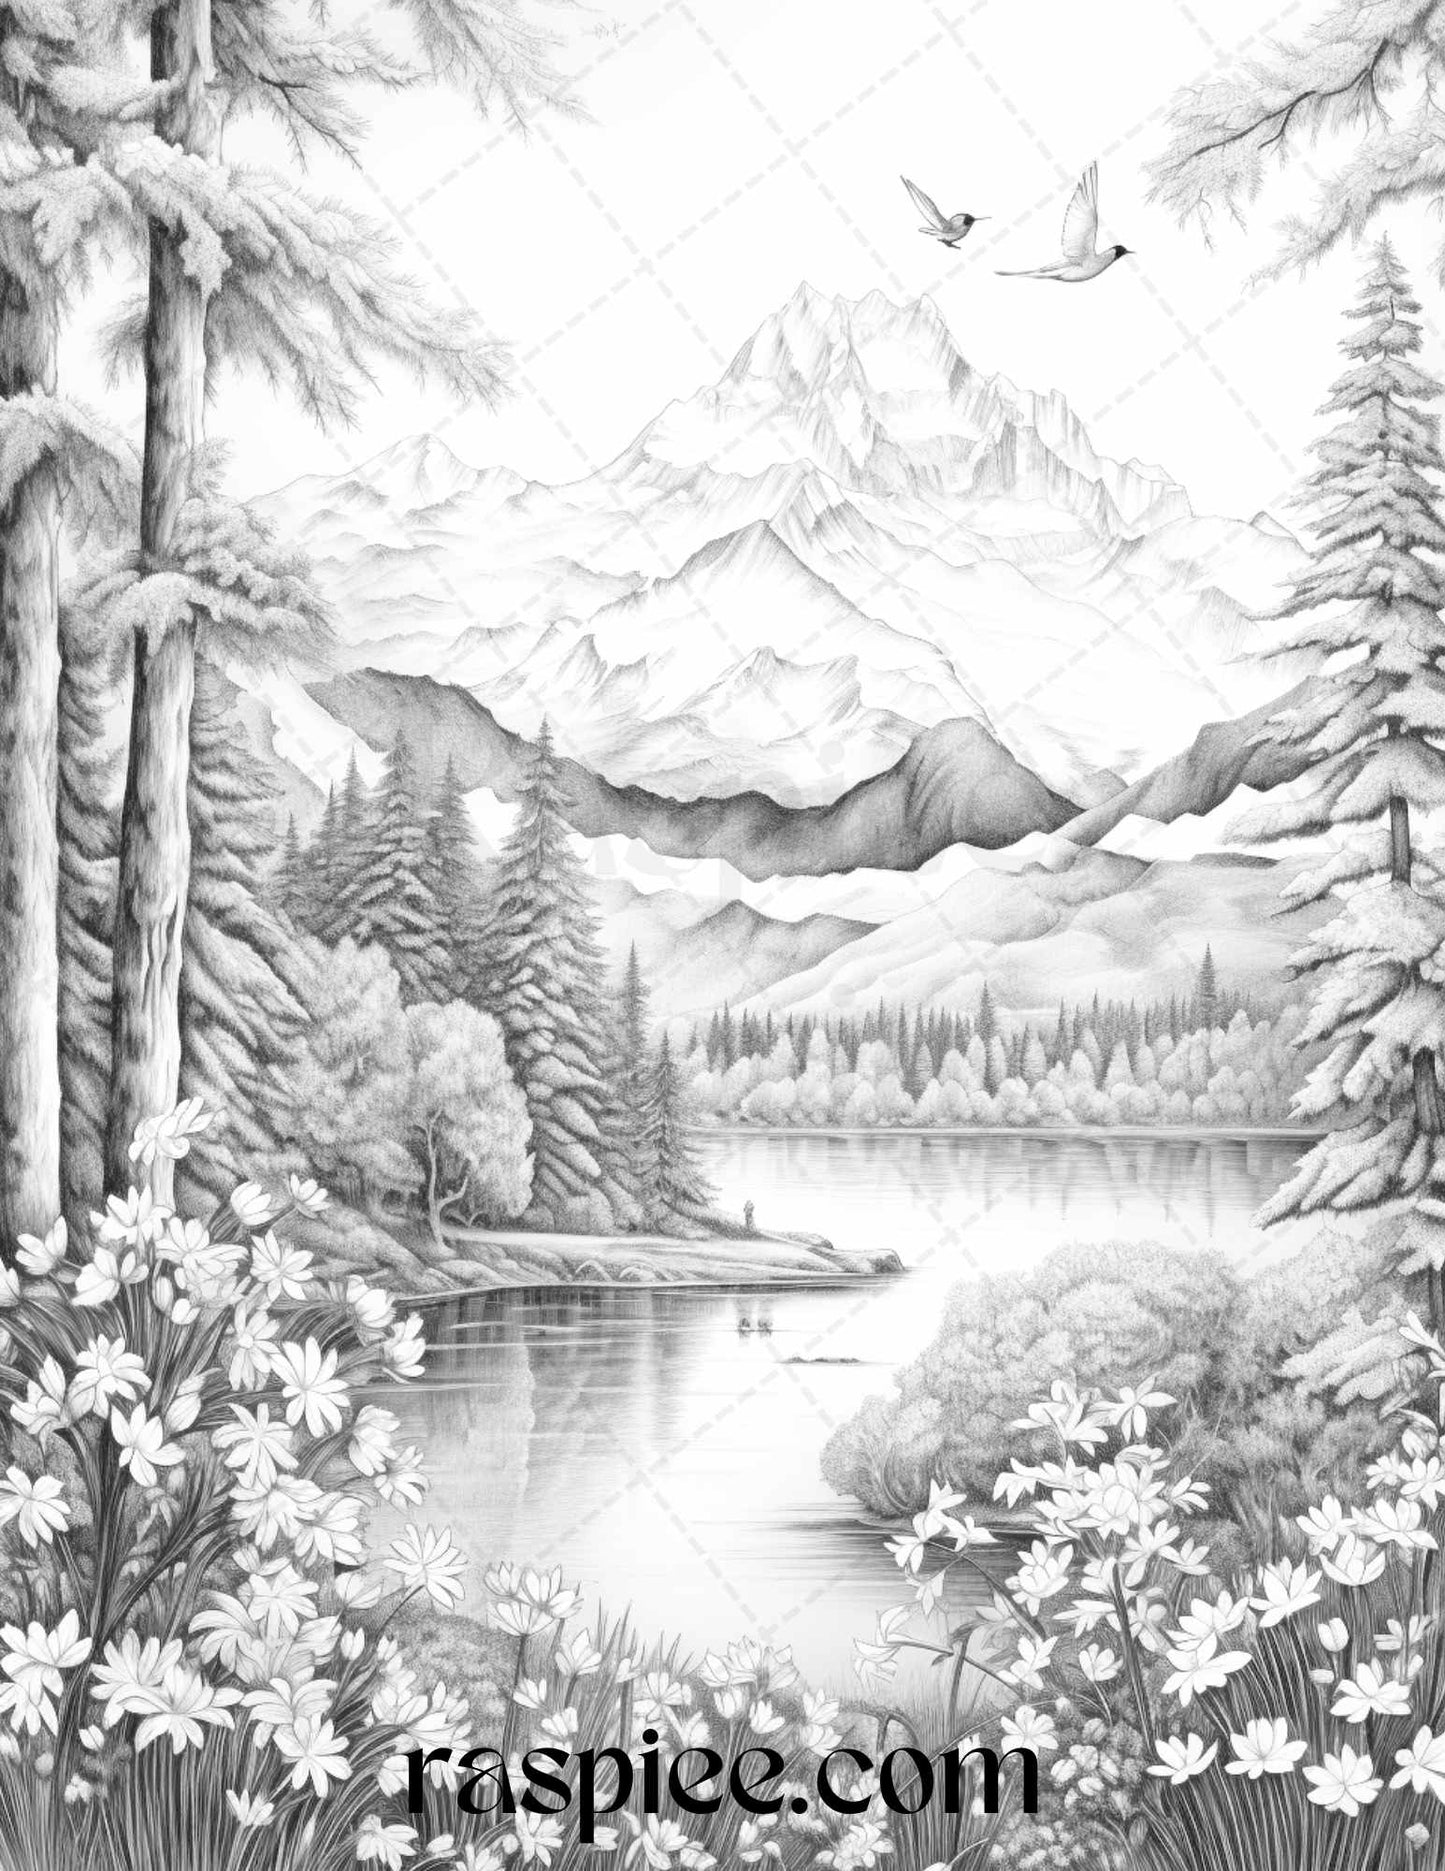 Serene Mountain Flower Landscape Coloring Page for Adults, Grayscale Mountain Flower Illustration for Stress Relief Coloring